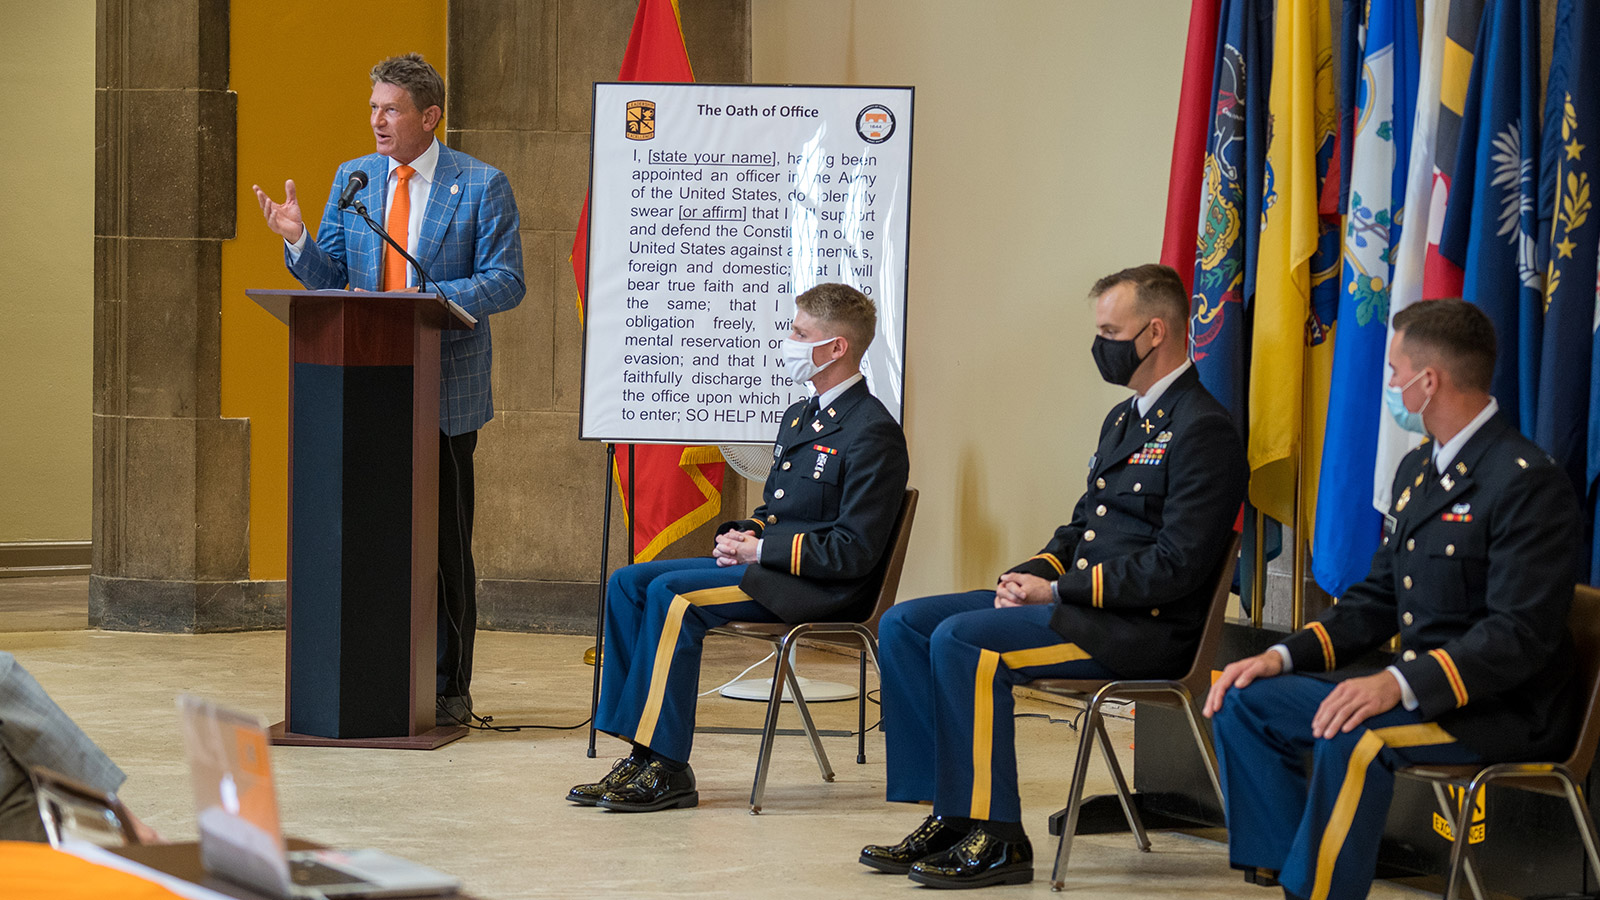 Randy Boyd speaks at a ROTC commissioning ceremony, with 3 student cadets seated in front of service flags